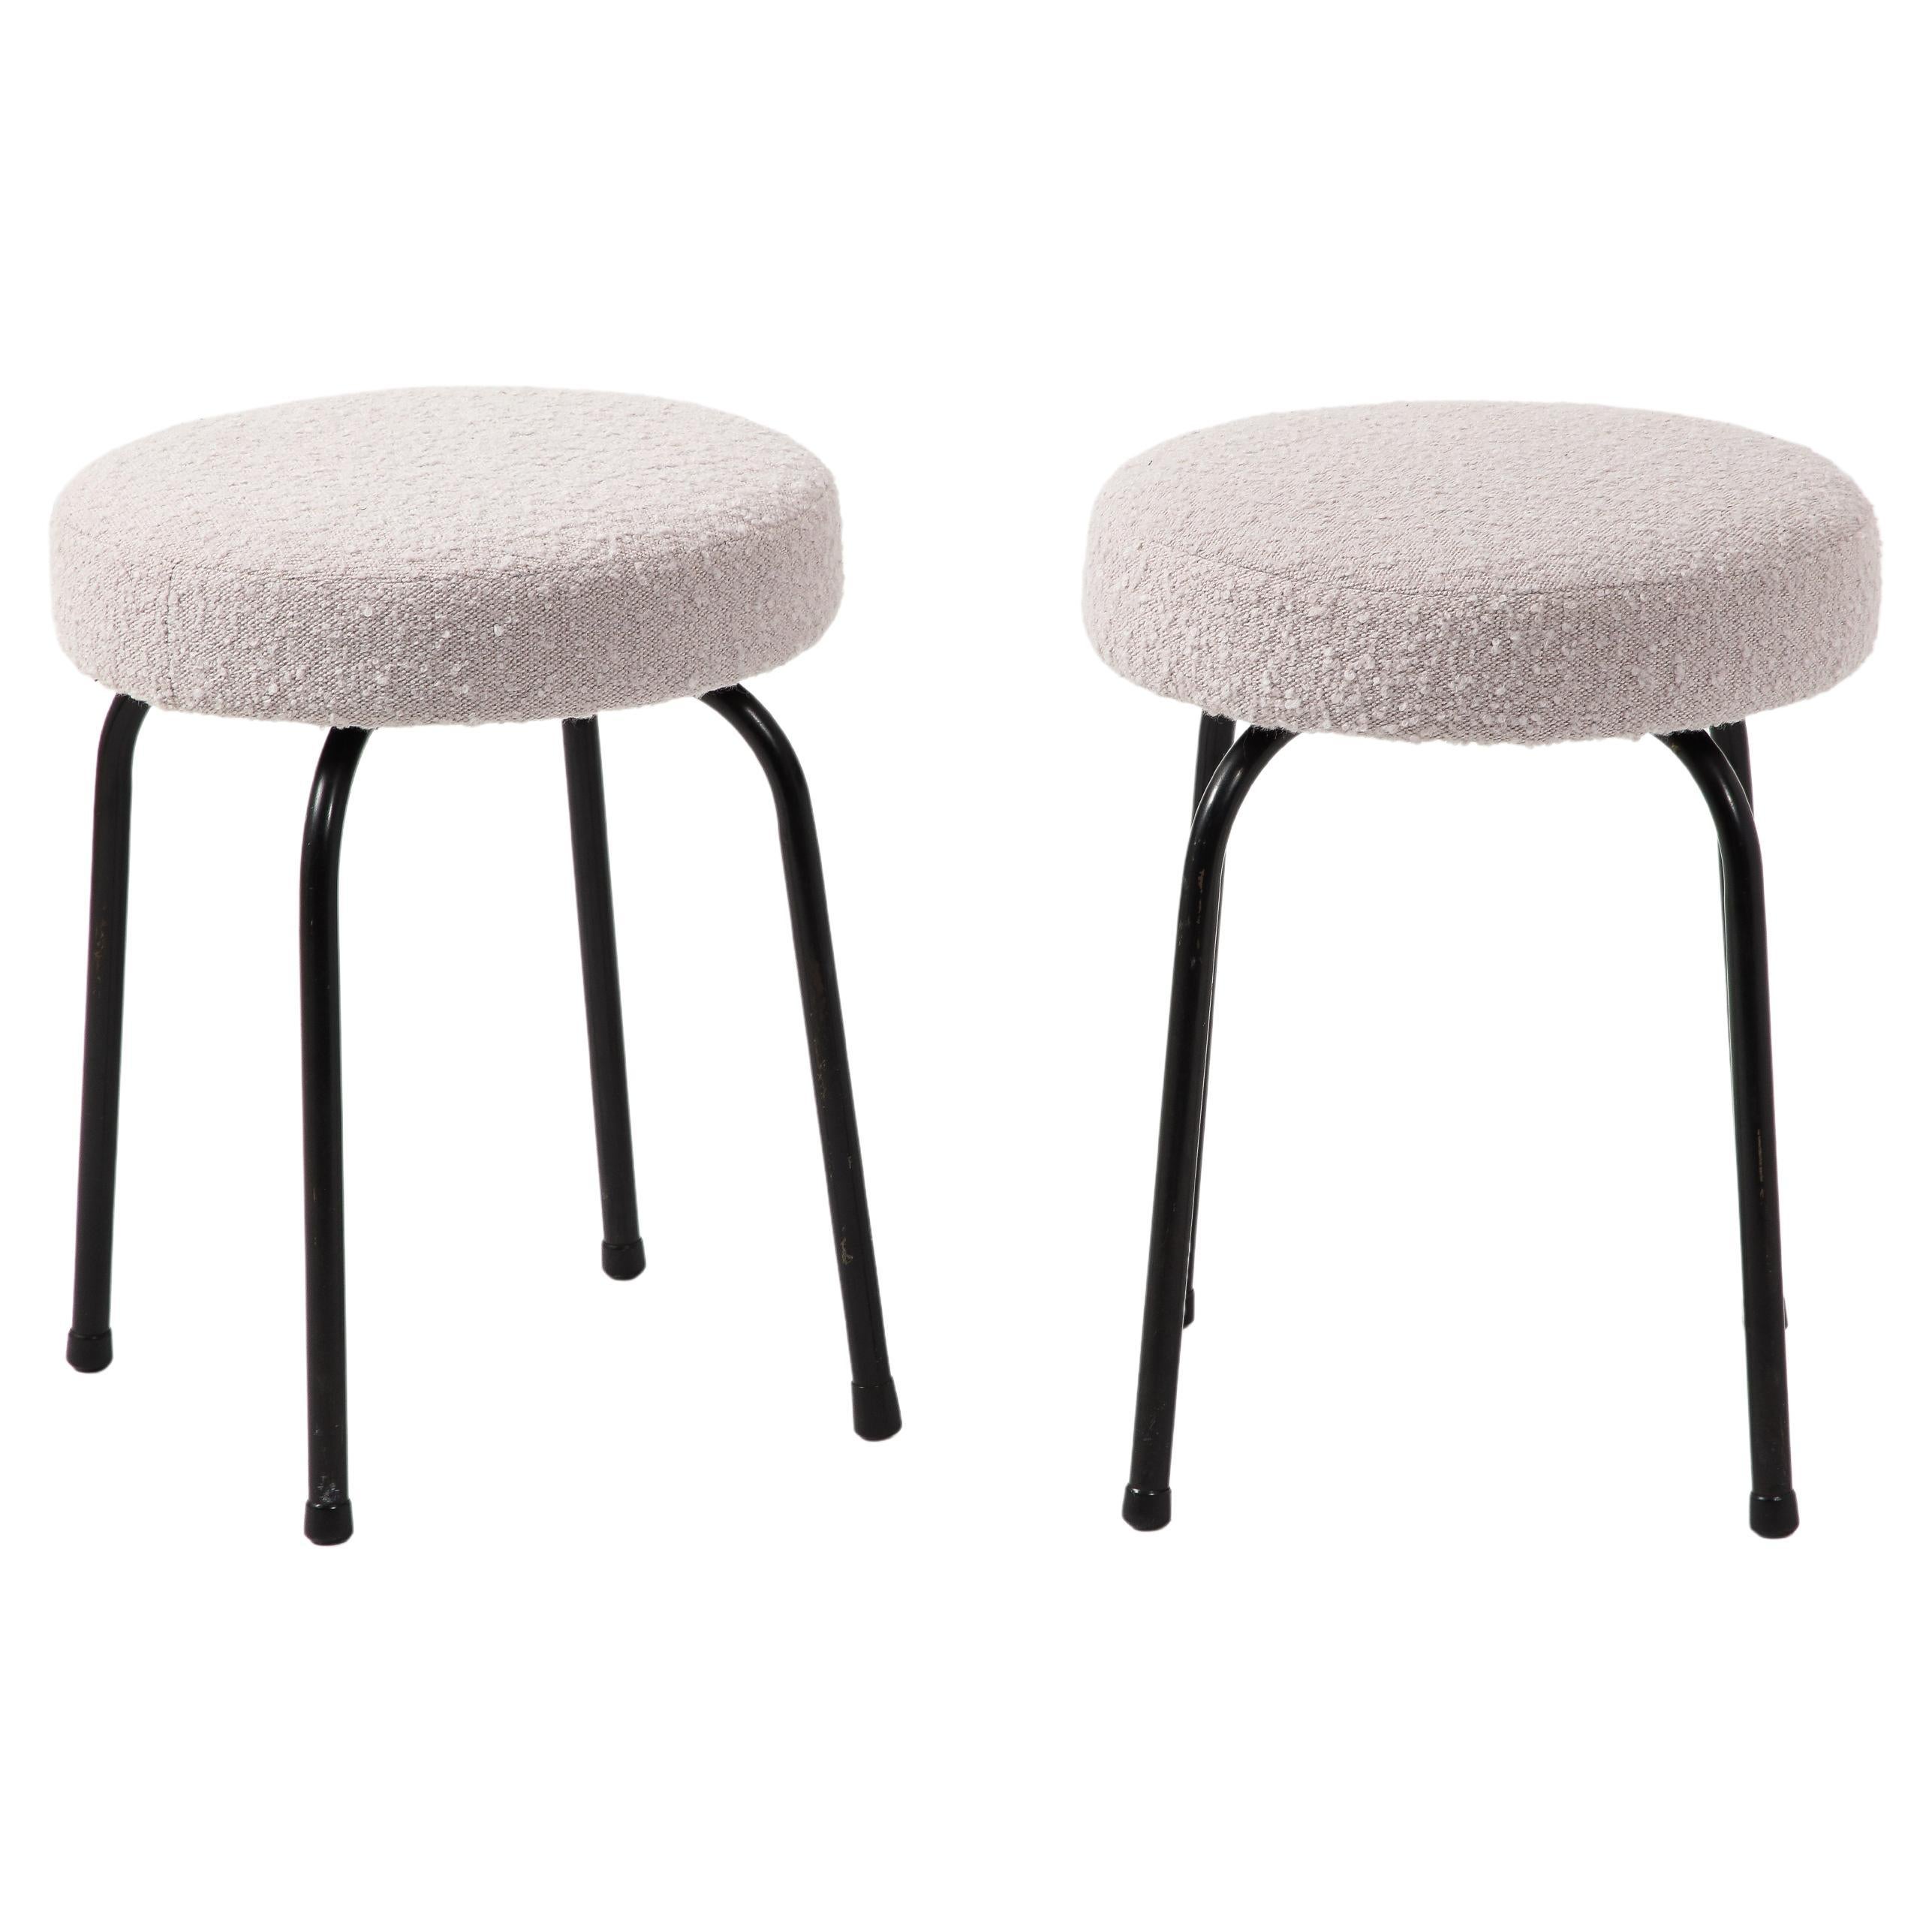 Pair of Boucle & Black Steel Stools, France 1950's For Sale